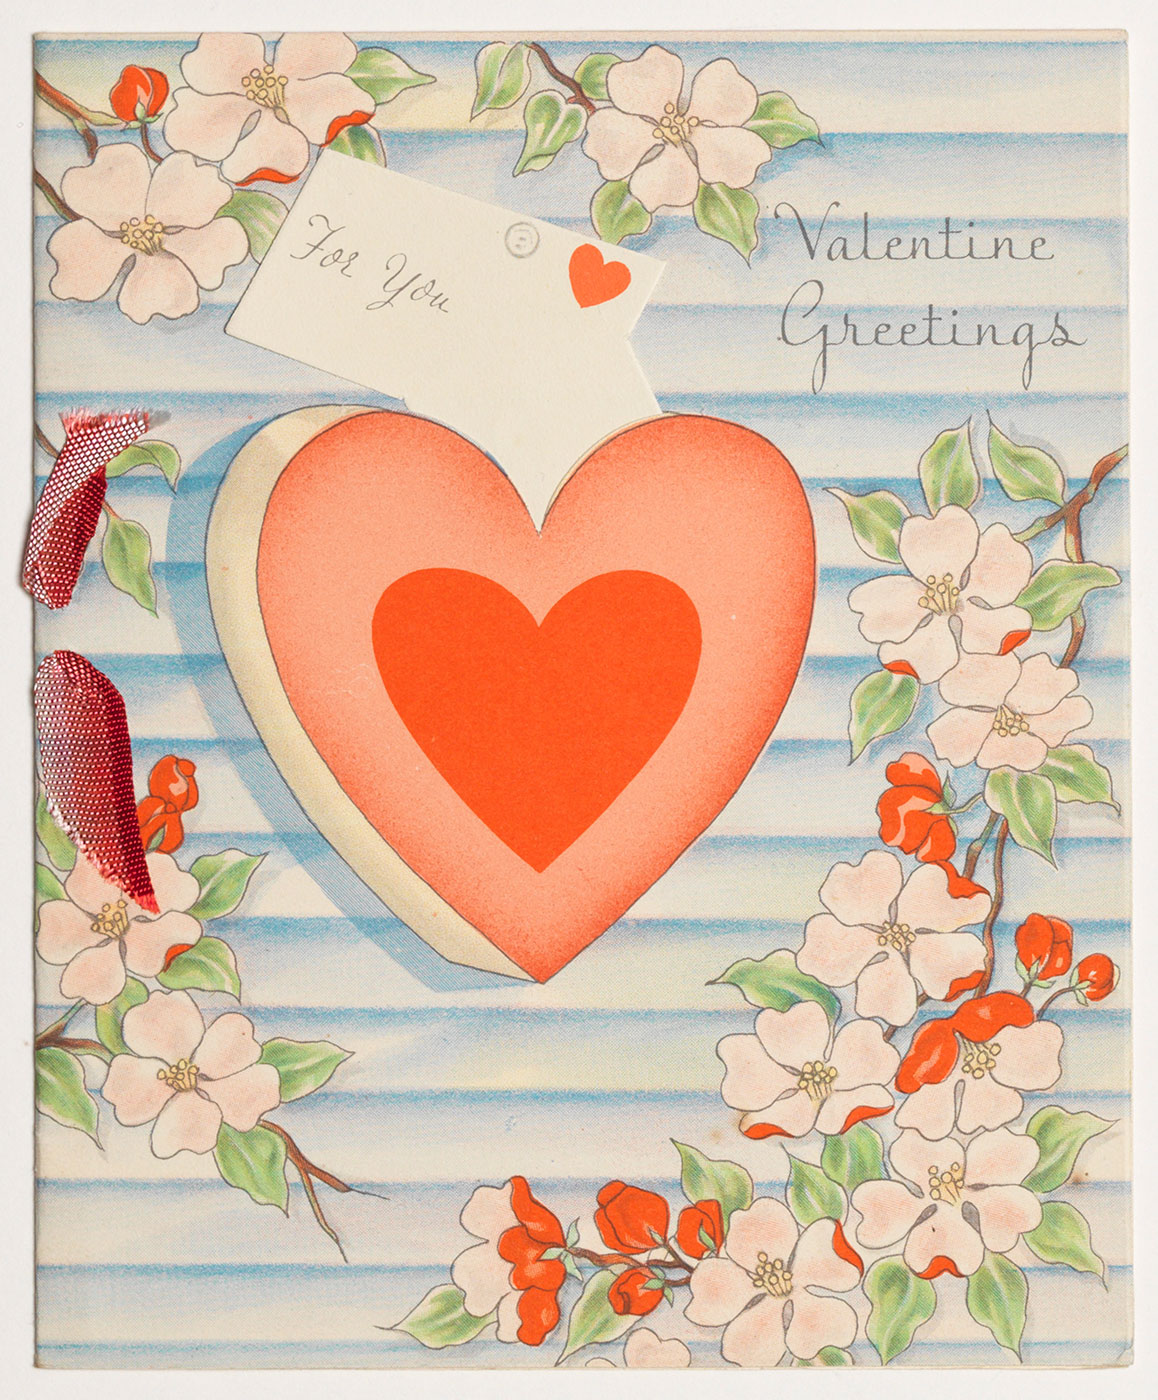 Cover of a Valentine's Day card with illustrated hearts and flowers titled "Valentine Greetings, For You"